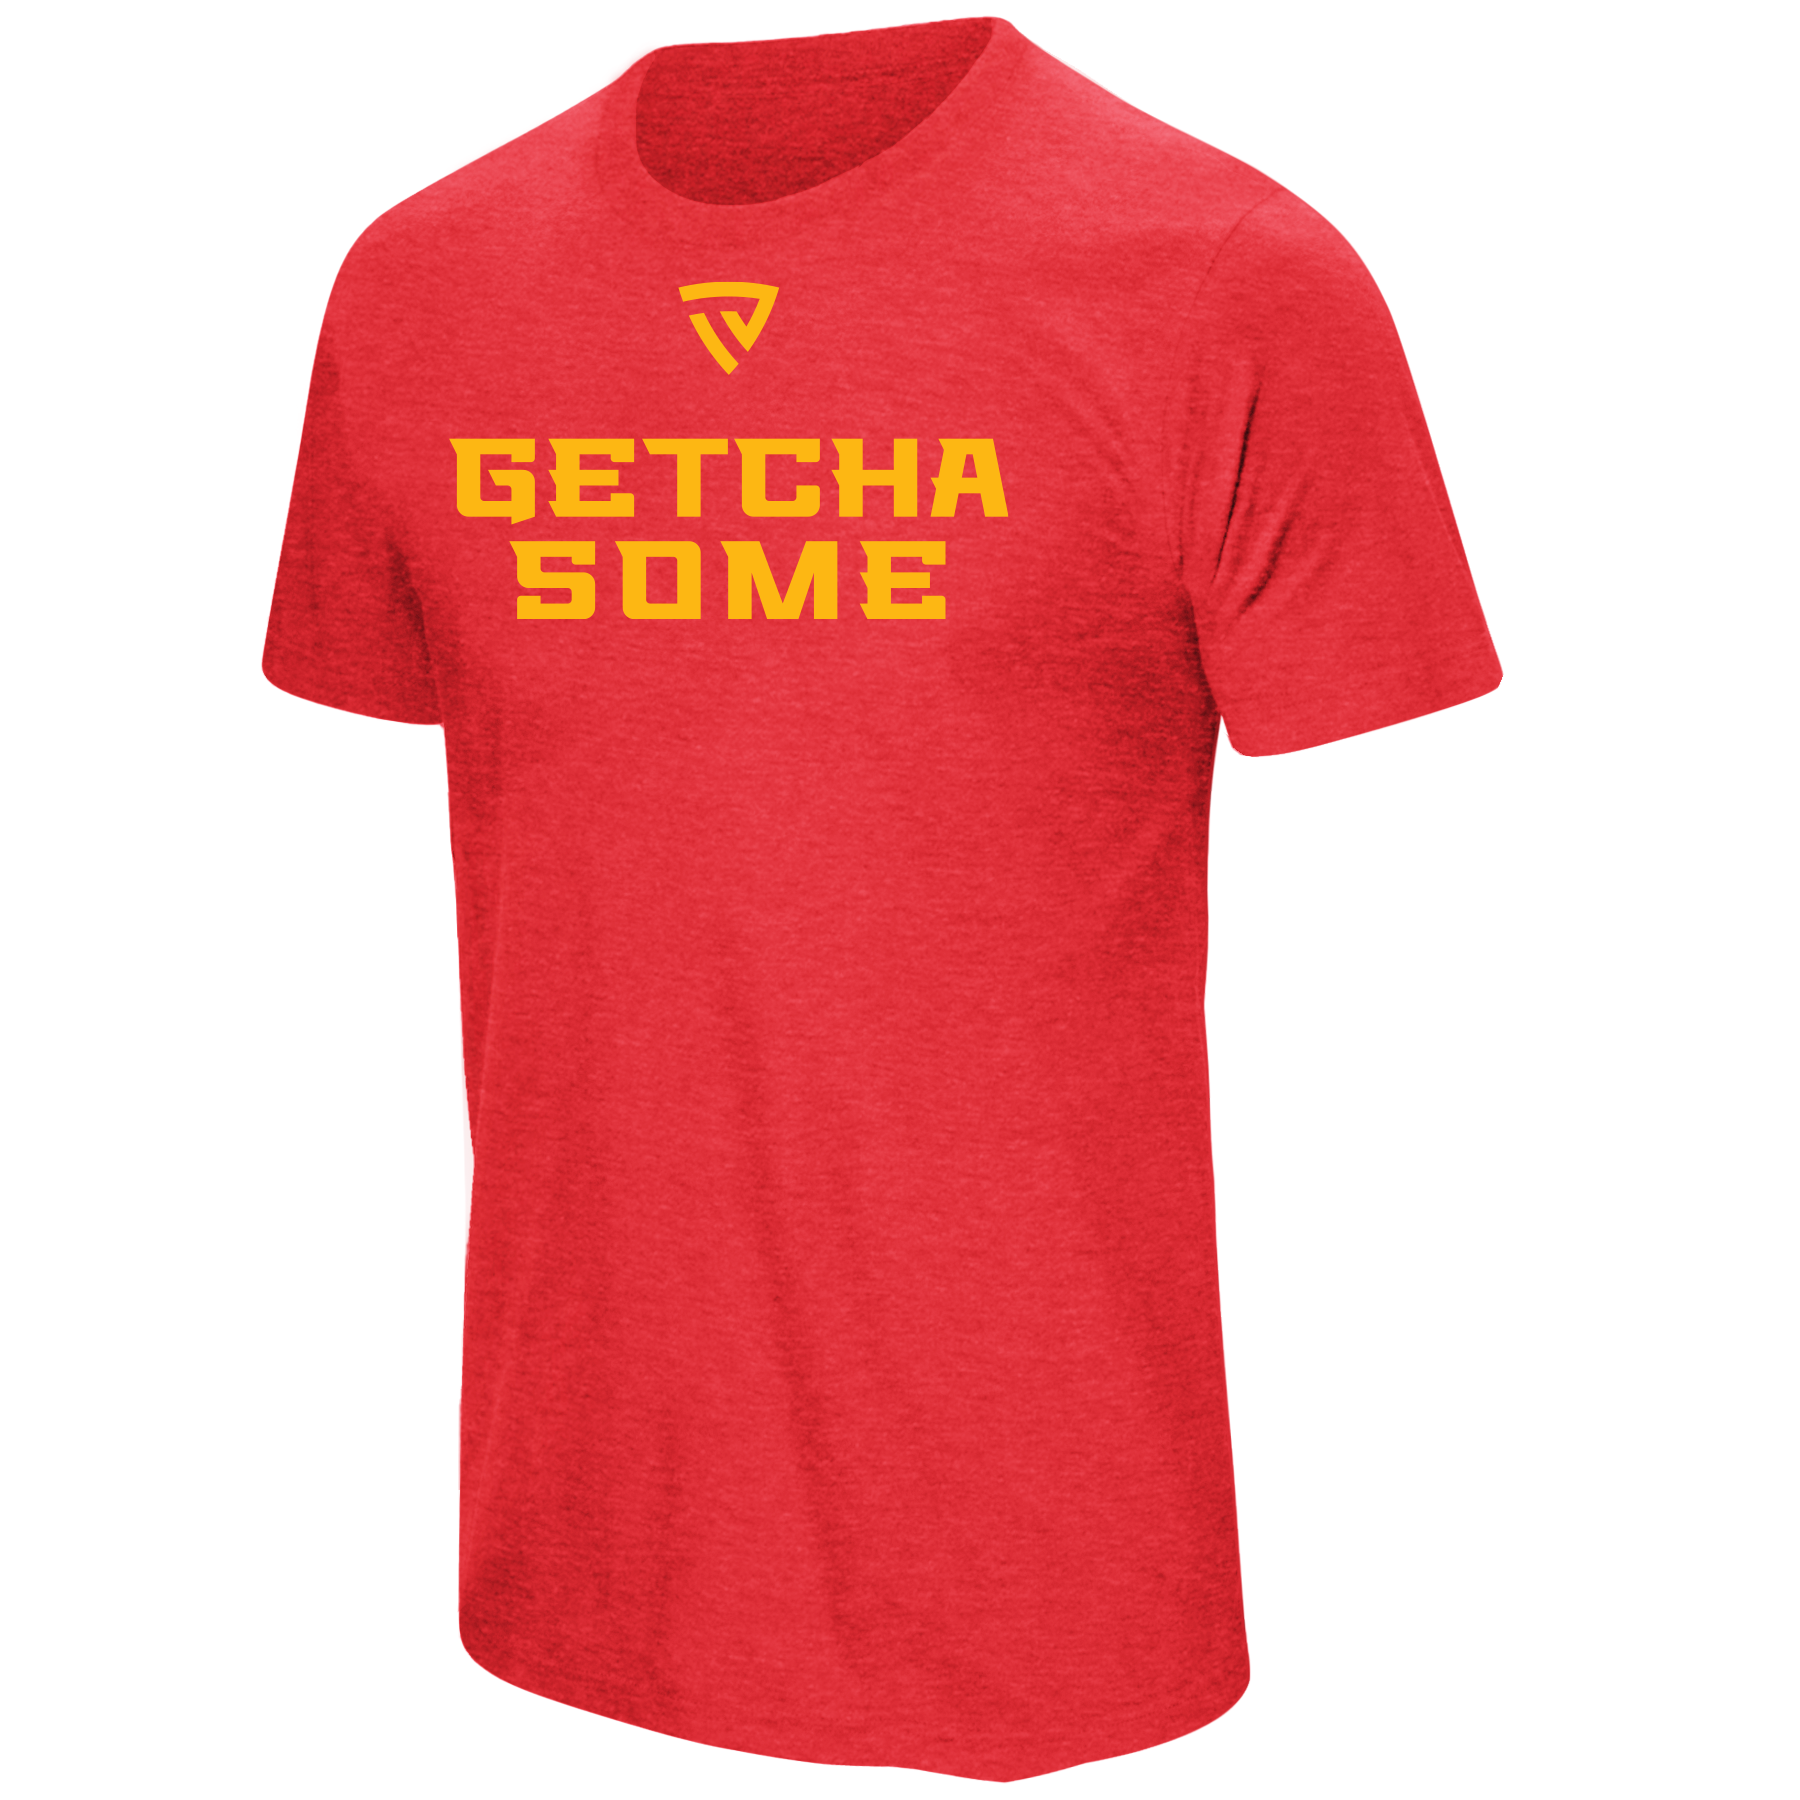 Heather Red Getcha Some Tee